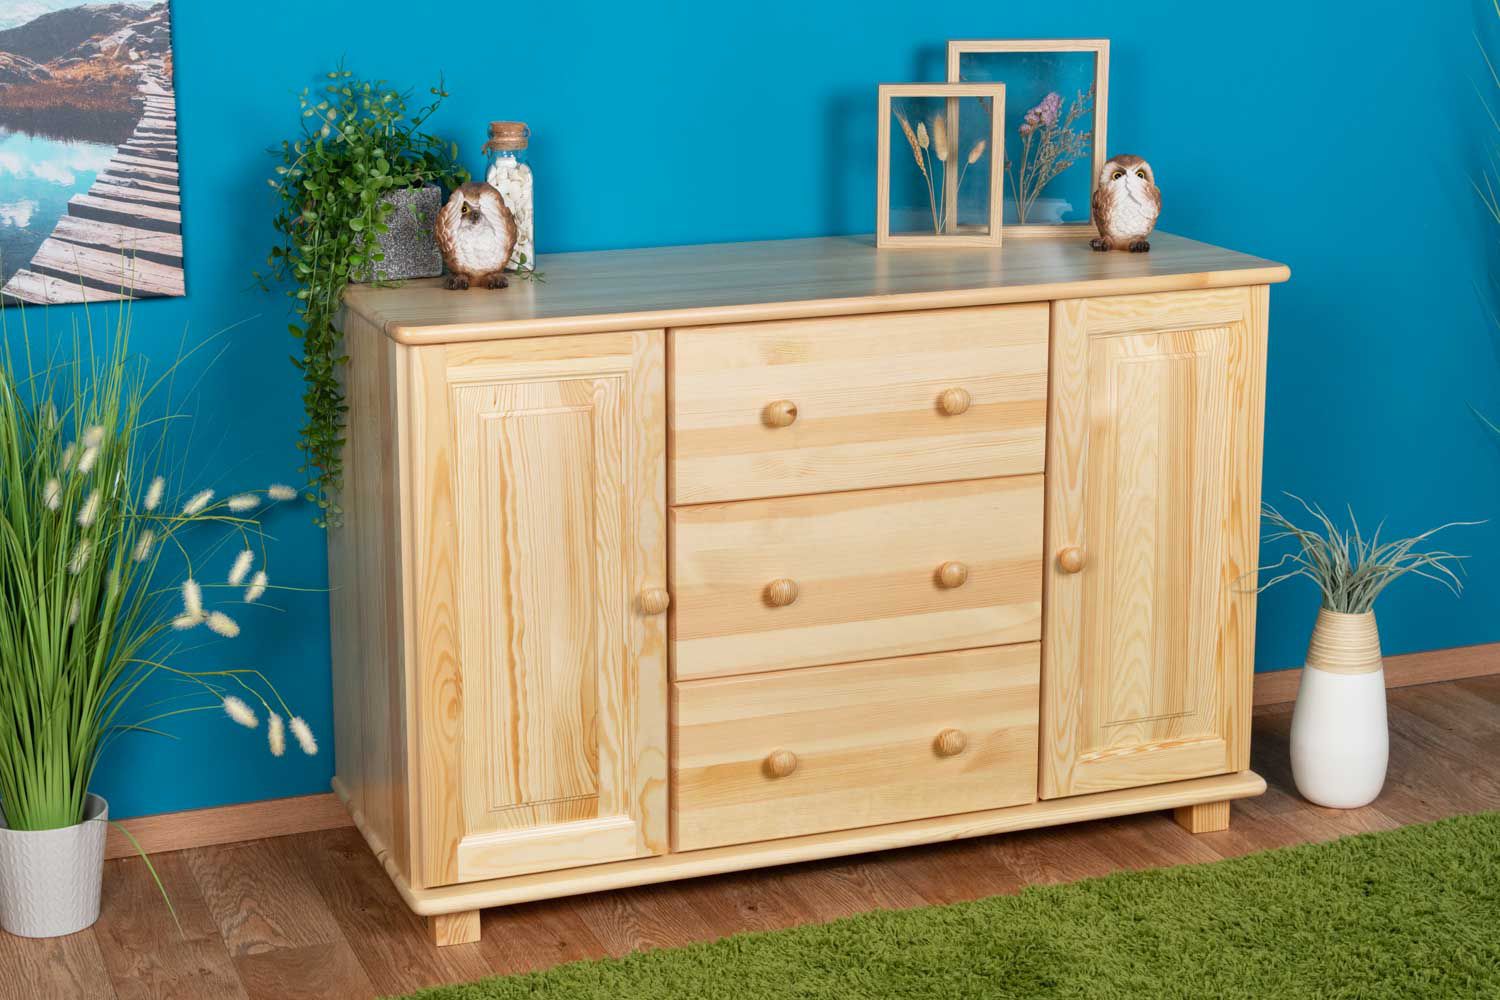 Chest of drawers solid pine solid wood natural 045 - Dimensions 78 x 118 x 47 cm (H x W x D)